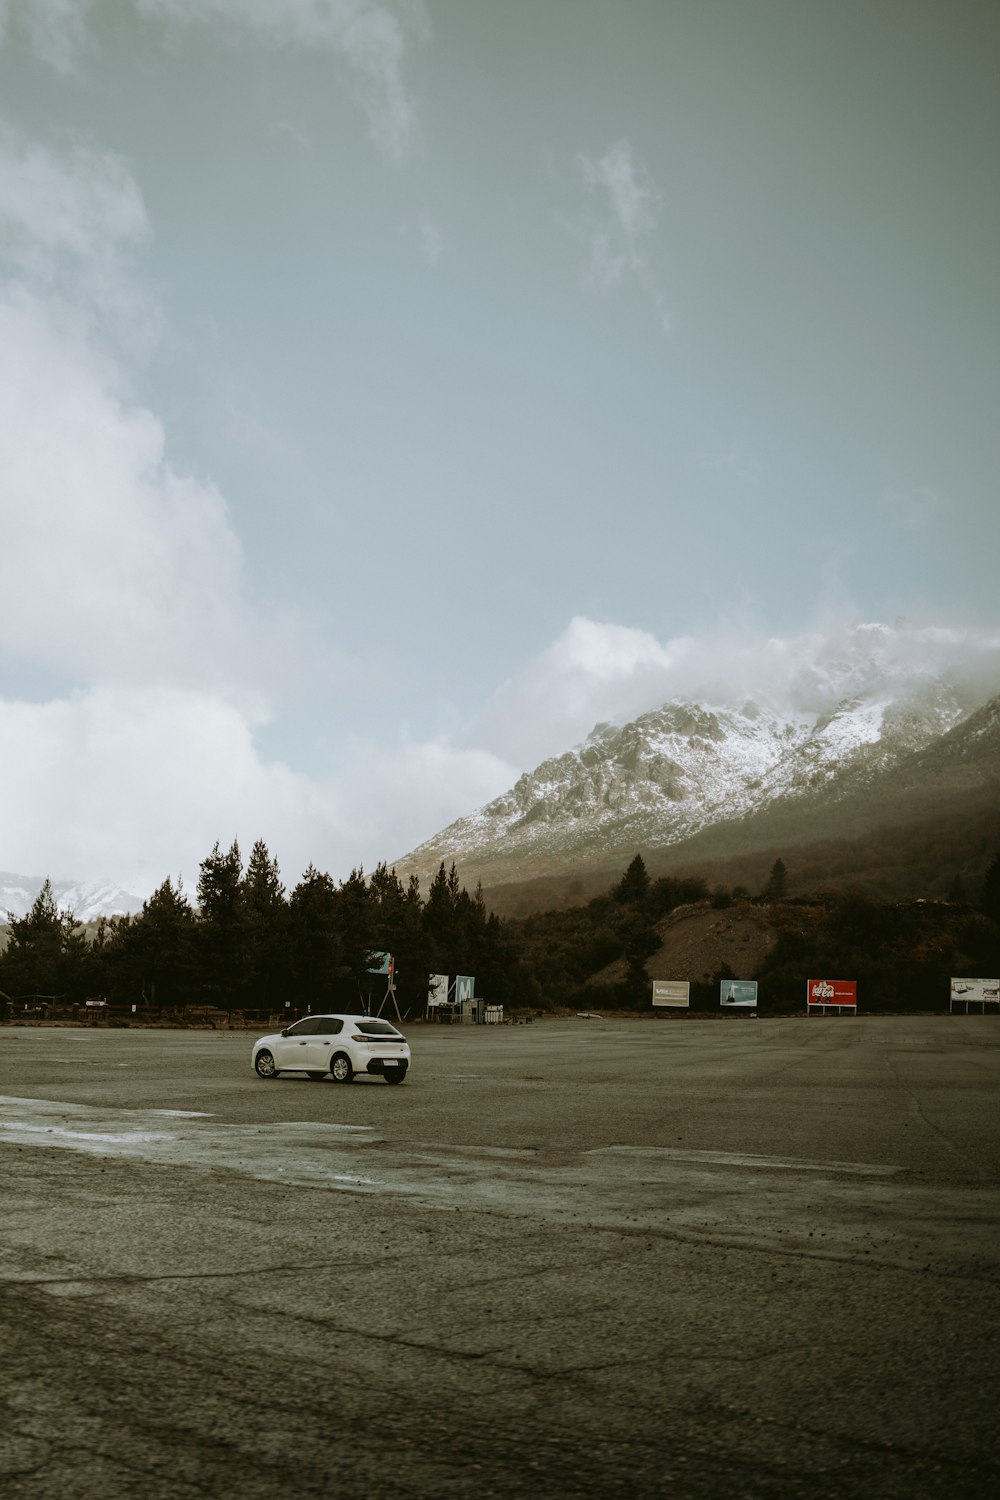 a car is parked in a parking lot with mountains in the background